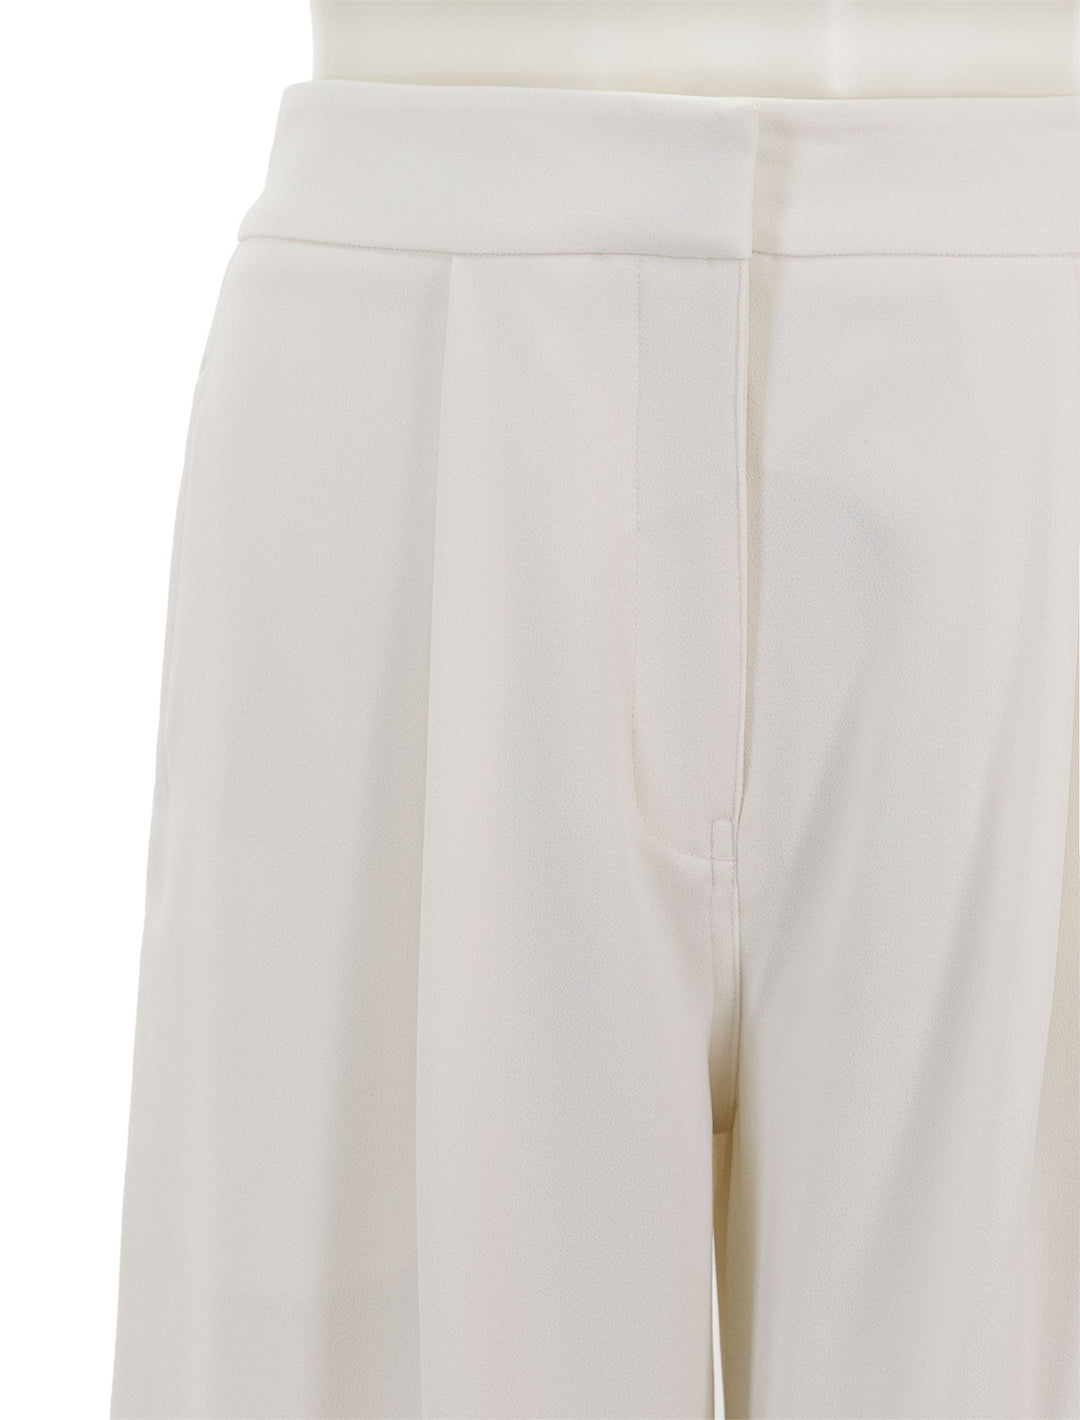 Close-up view of Saint Art's neve mid waisted wideleg trouser in ivory crepe.